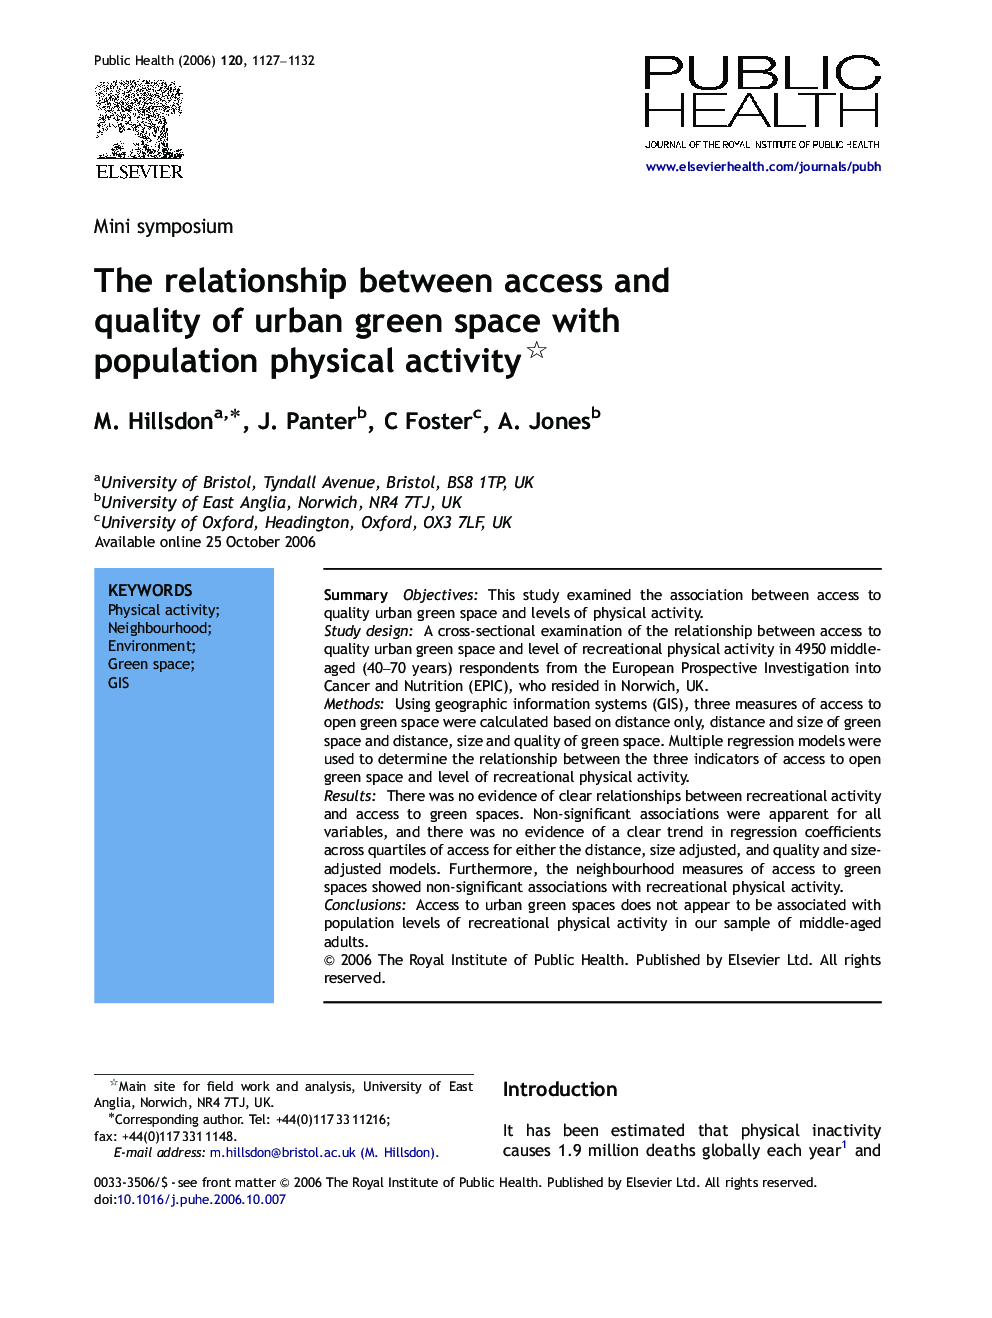 The relationship between access and quality of urban green space with population physical activity 